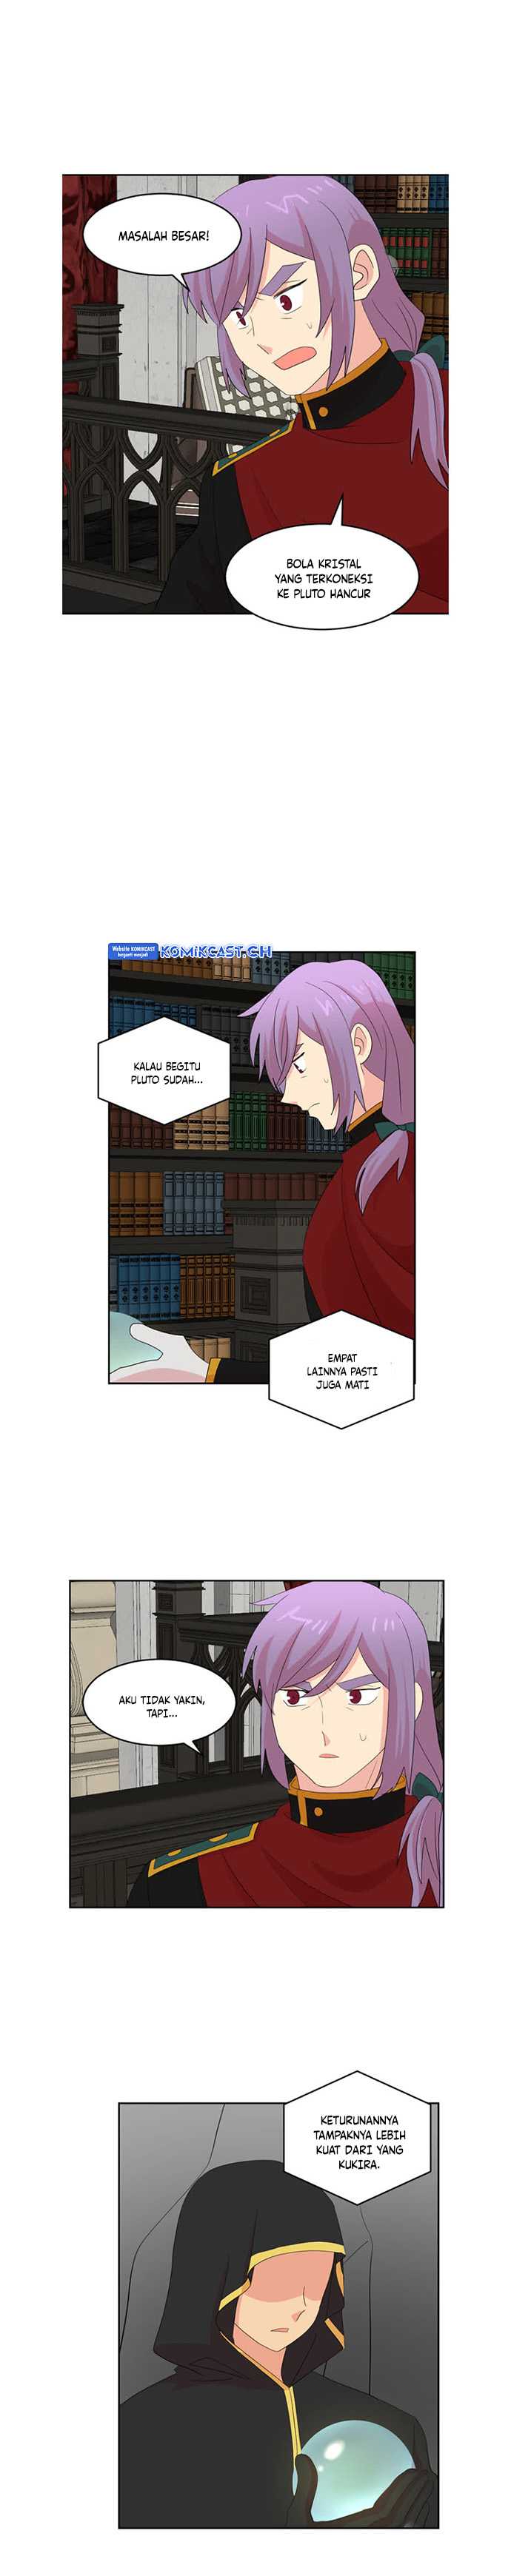 Bookworm Chapter 195